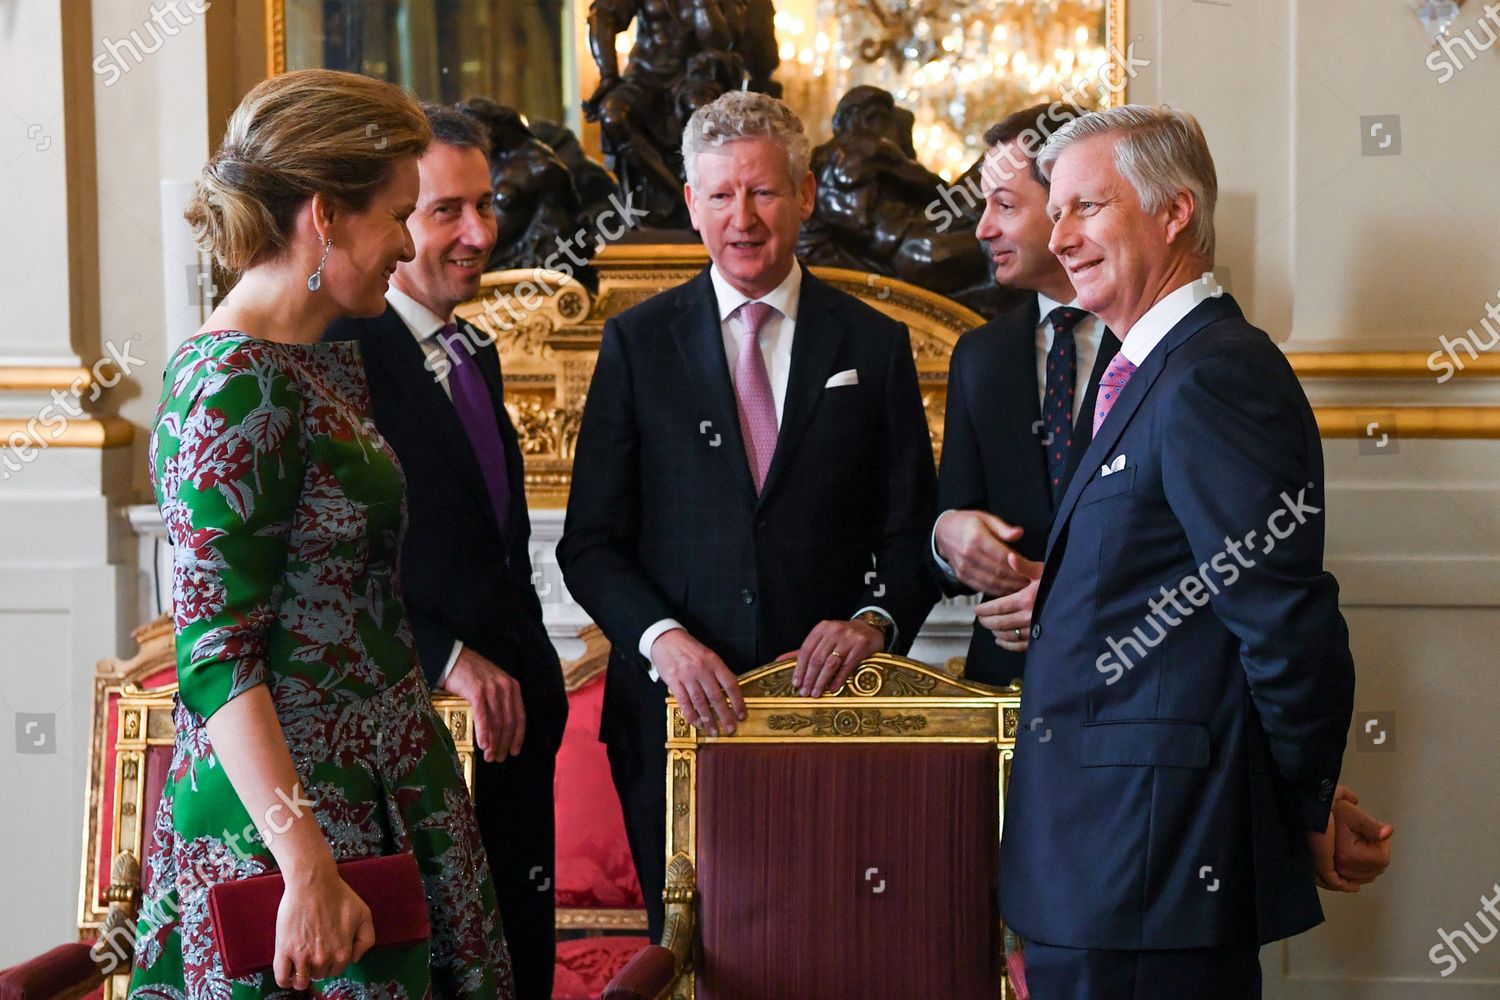 CASA REAL BELGA - Página 93 King-philippe-and-queen-mathilde-receive-the-heads-of-diplomatic-missions-brussels-belgium-shutterstock-editorial-10525487ac